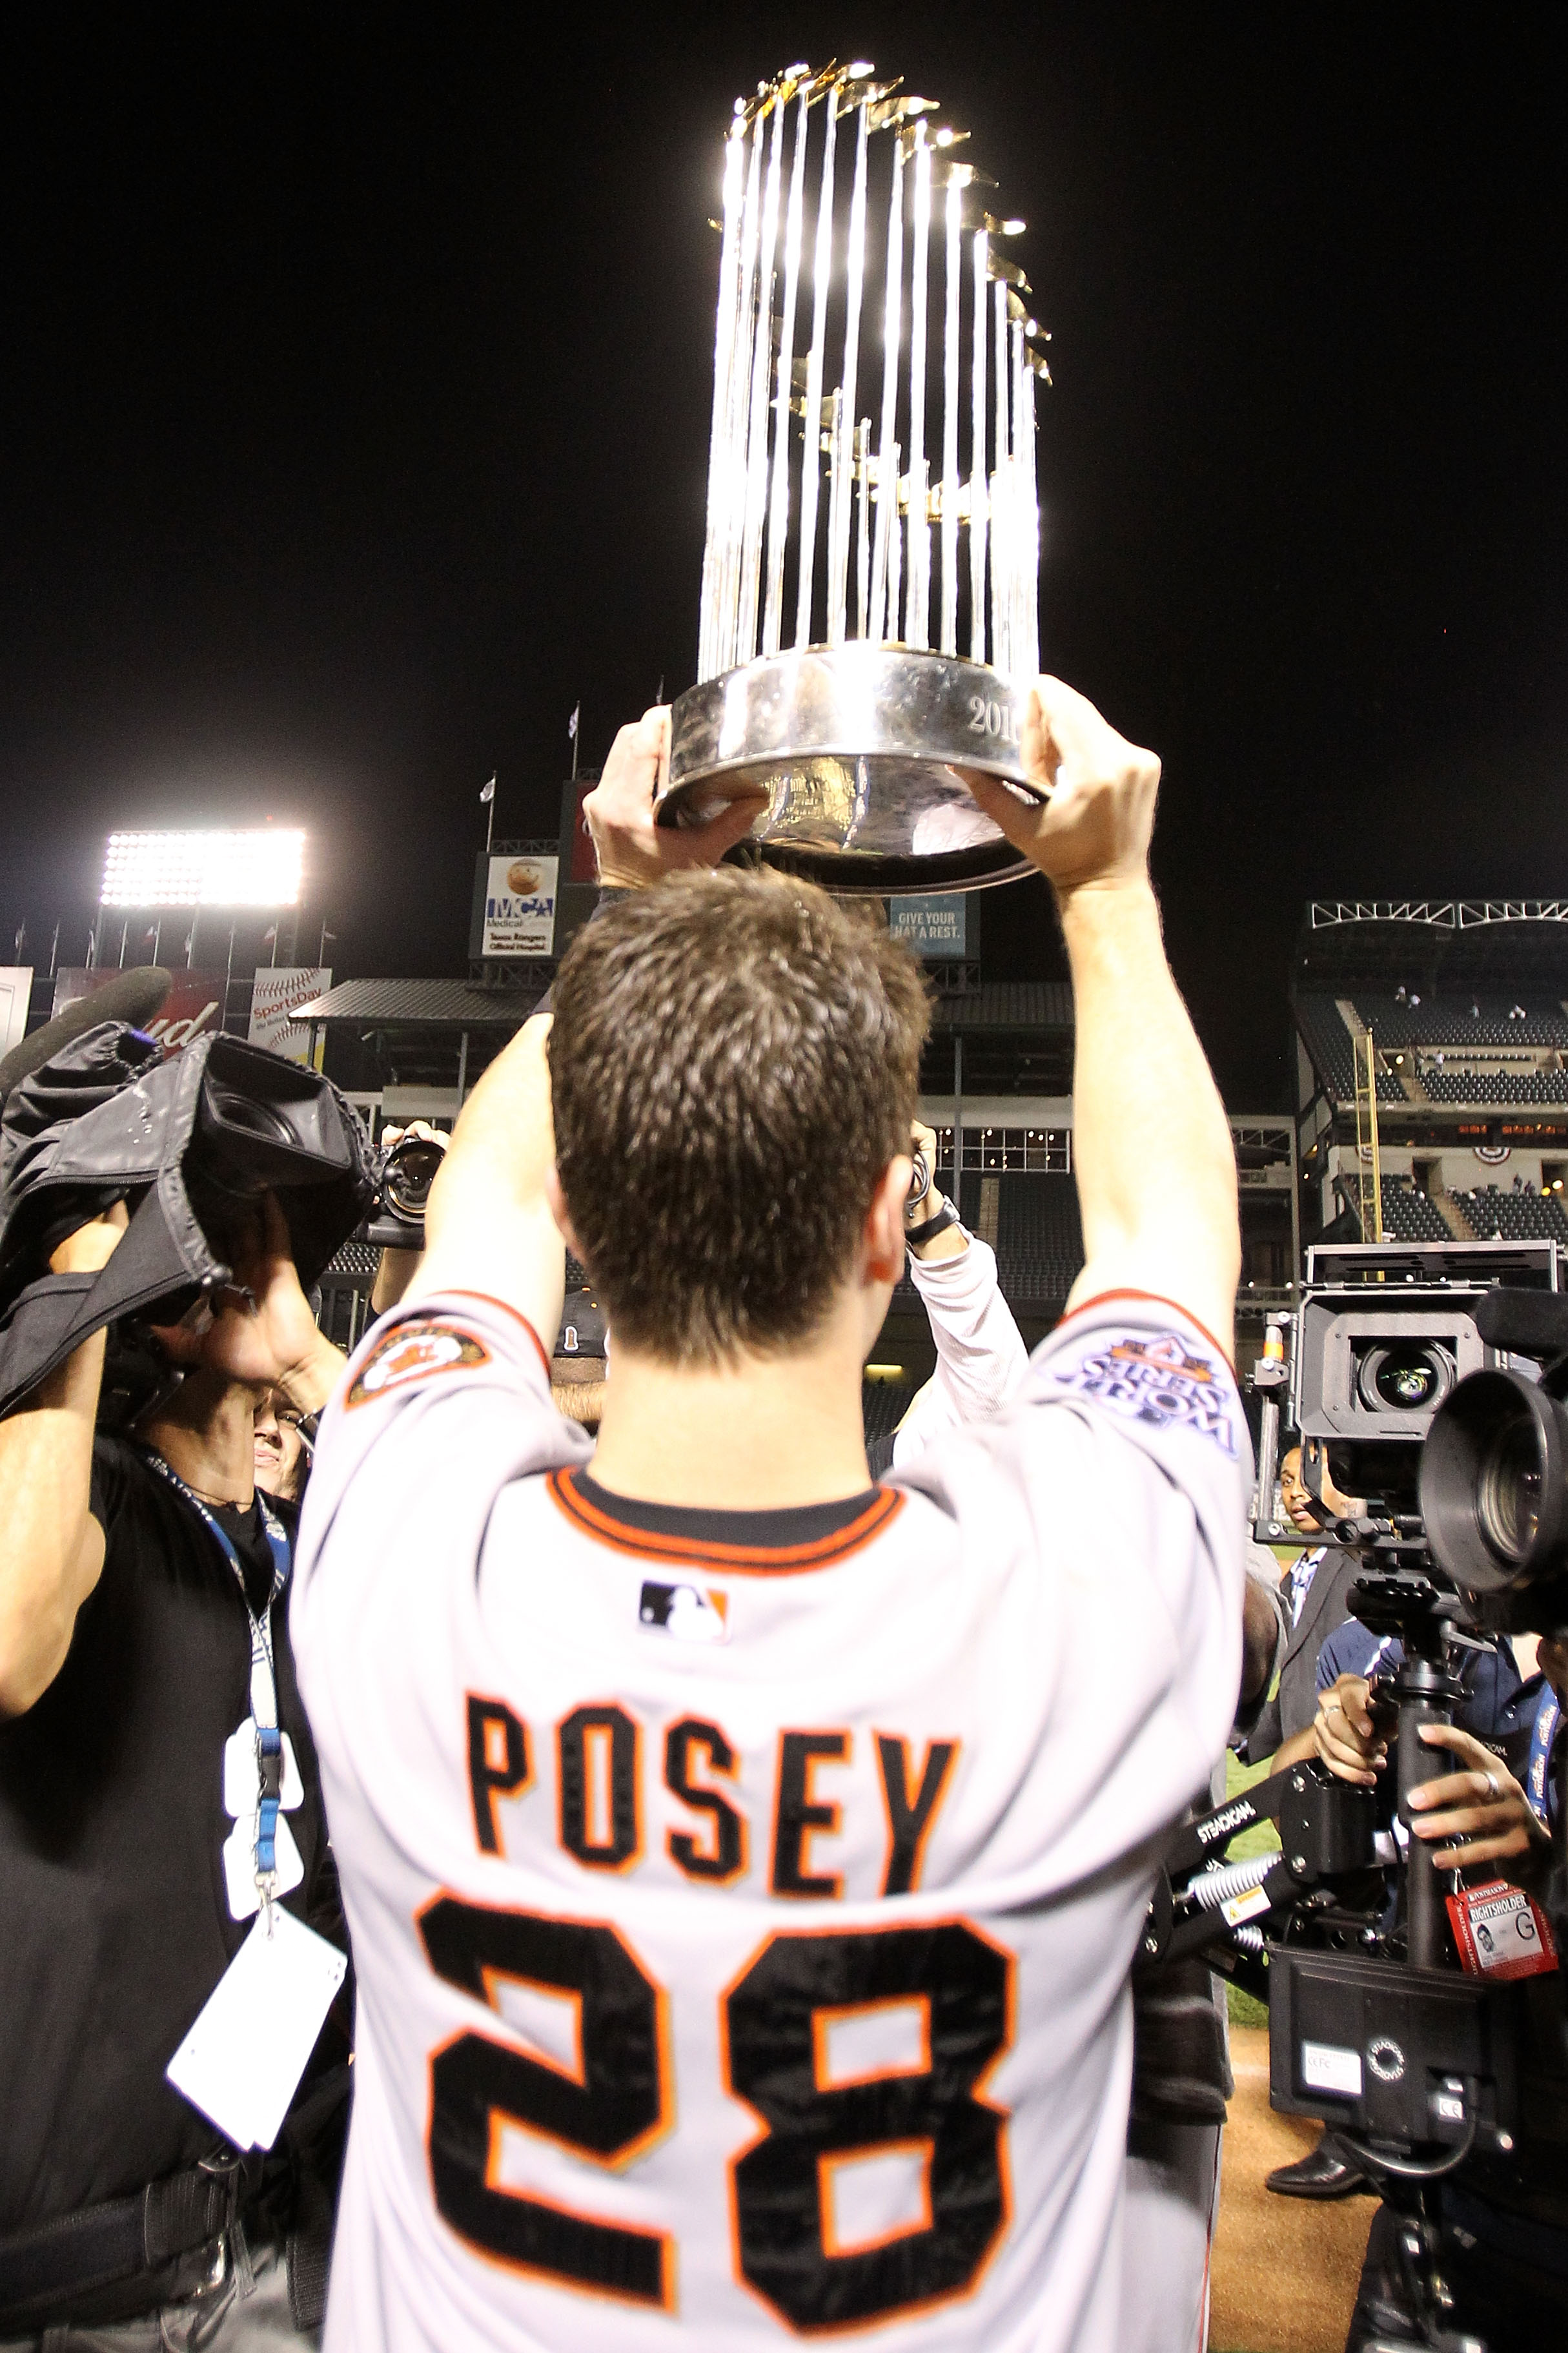 Download Buster Posey World Series Wallpaper